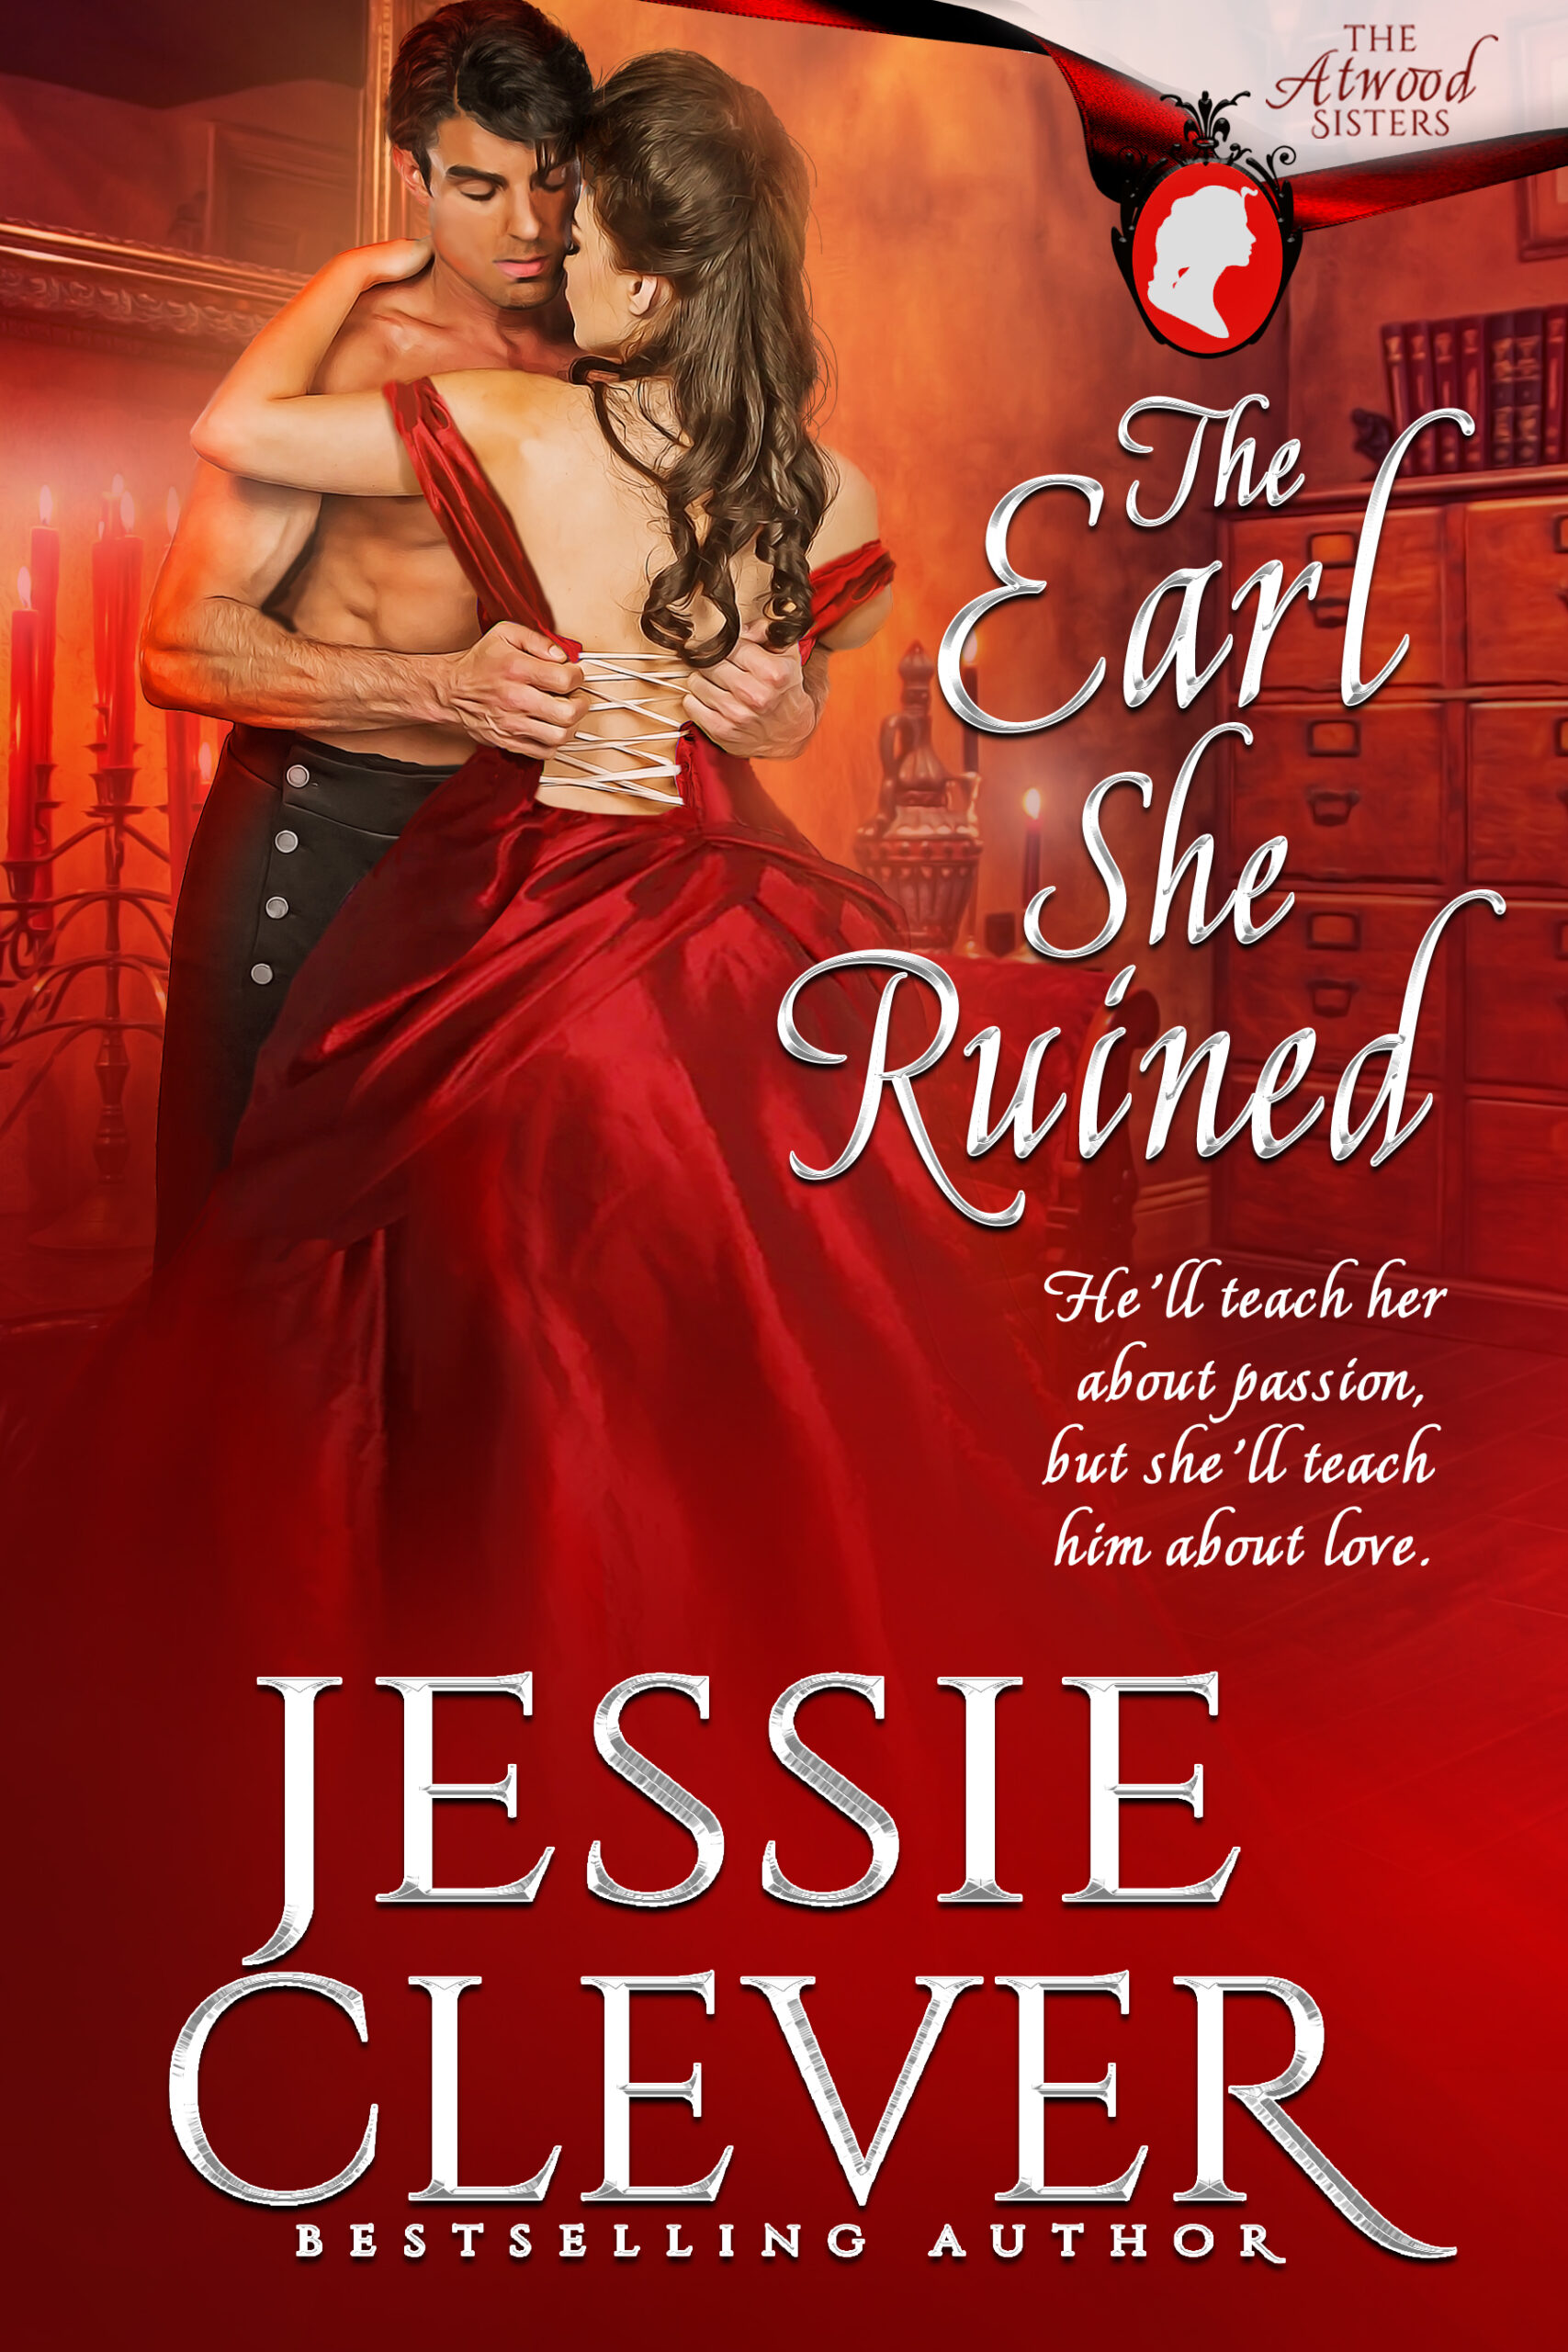 Now Available for Pre-Order: The Earl She Ruined